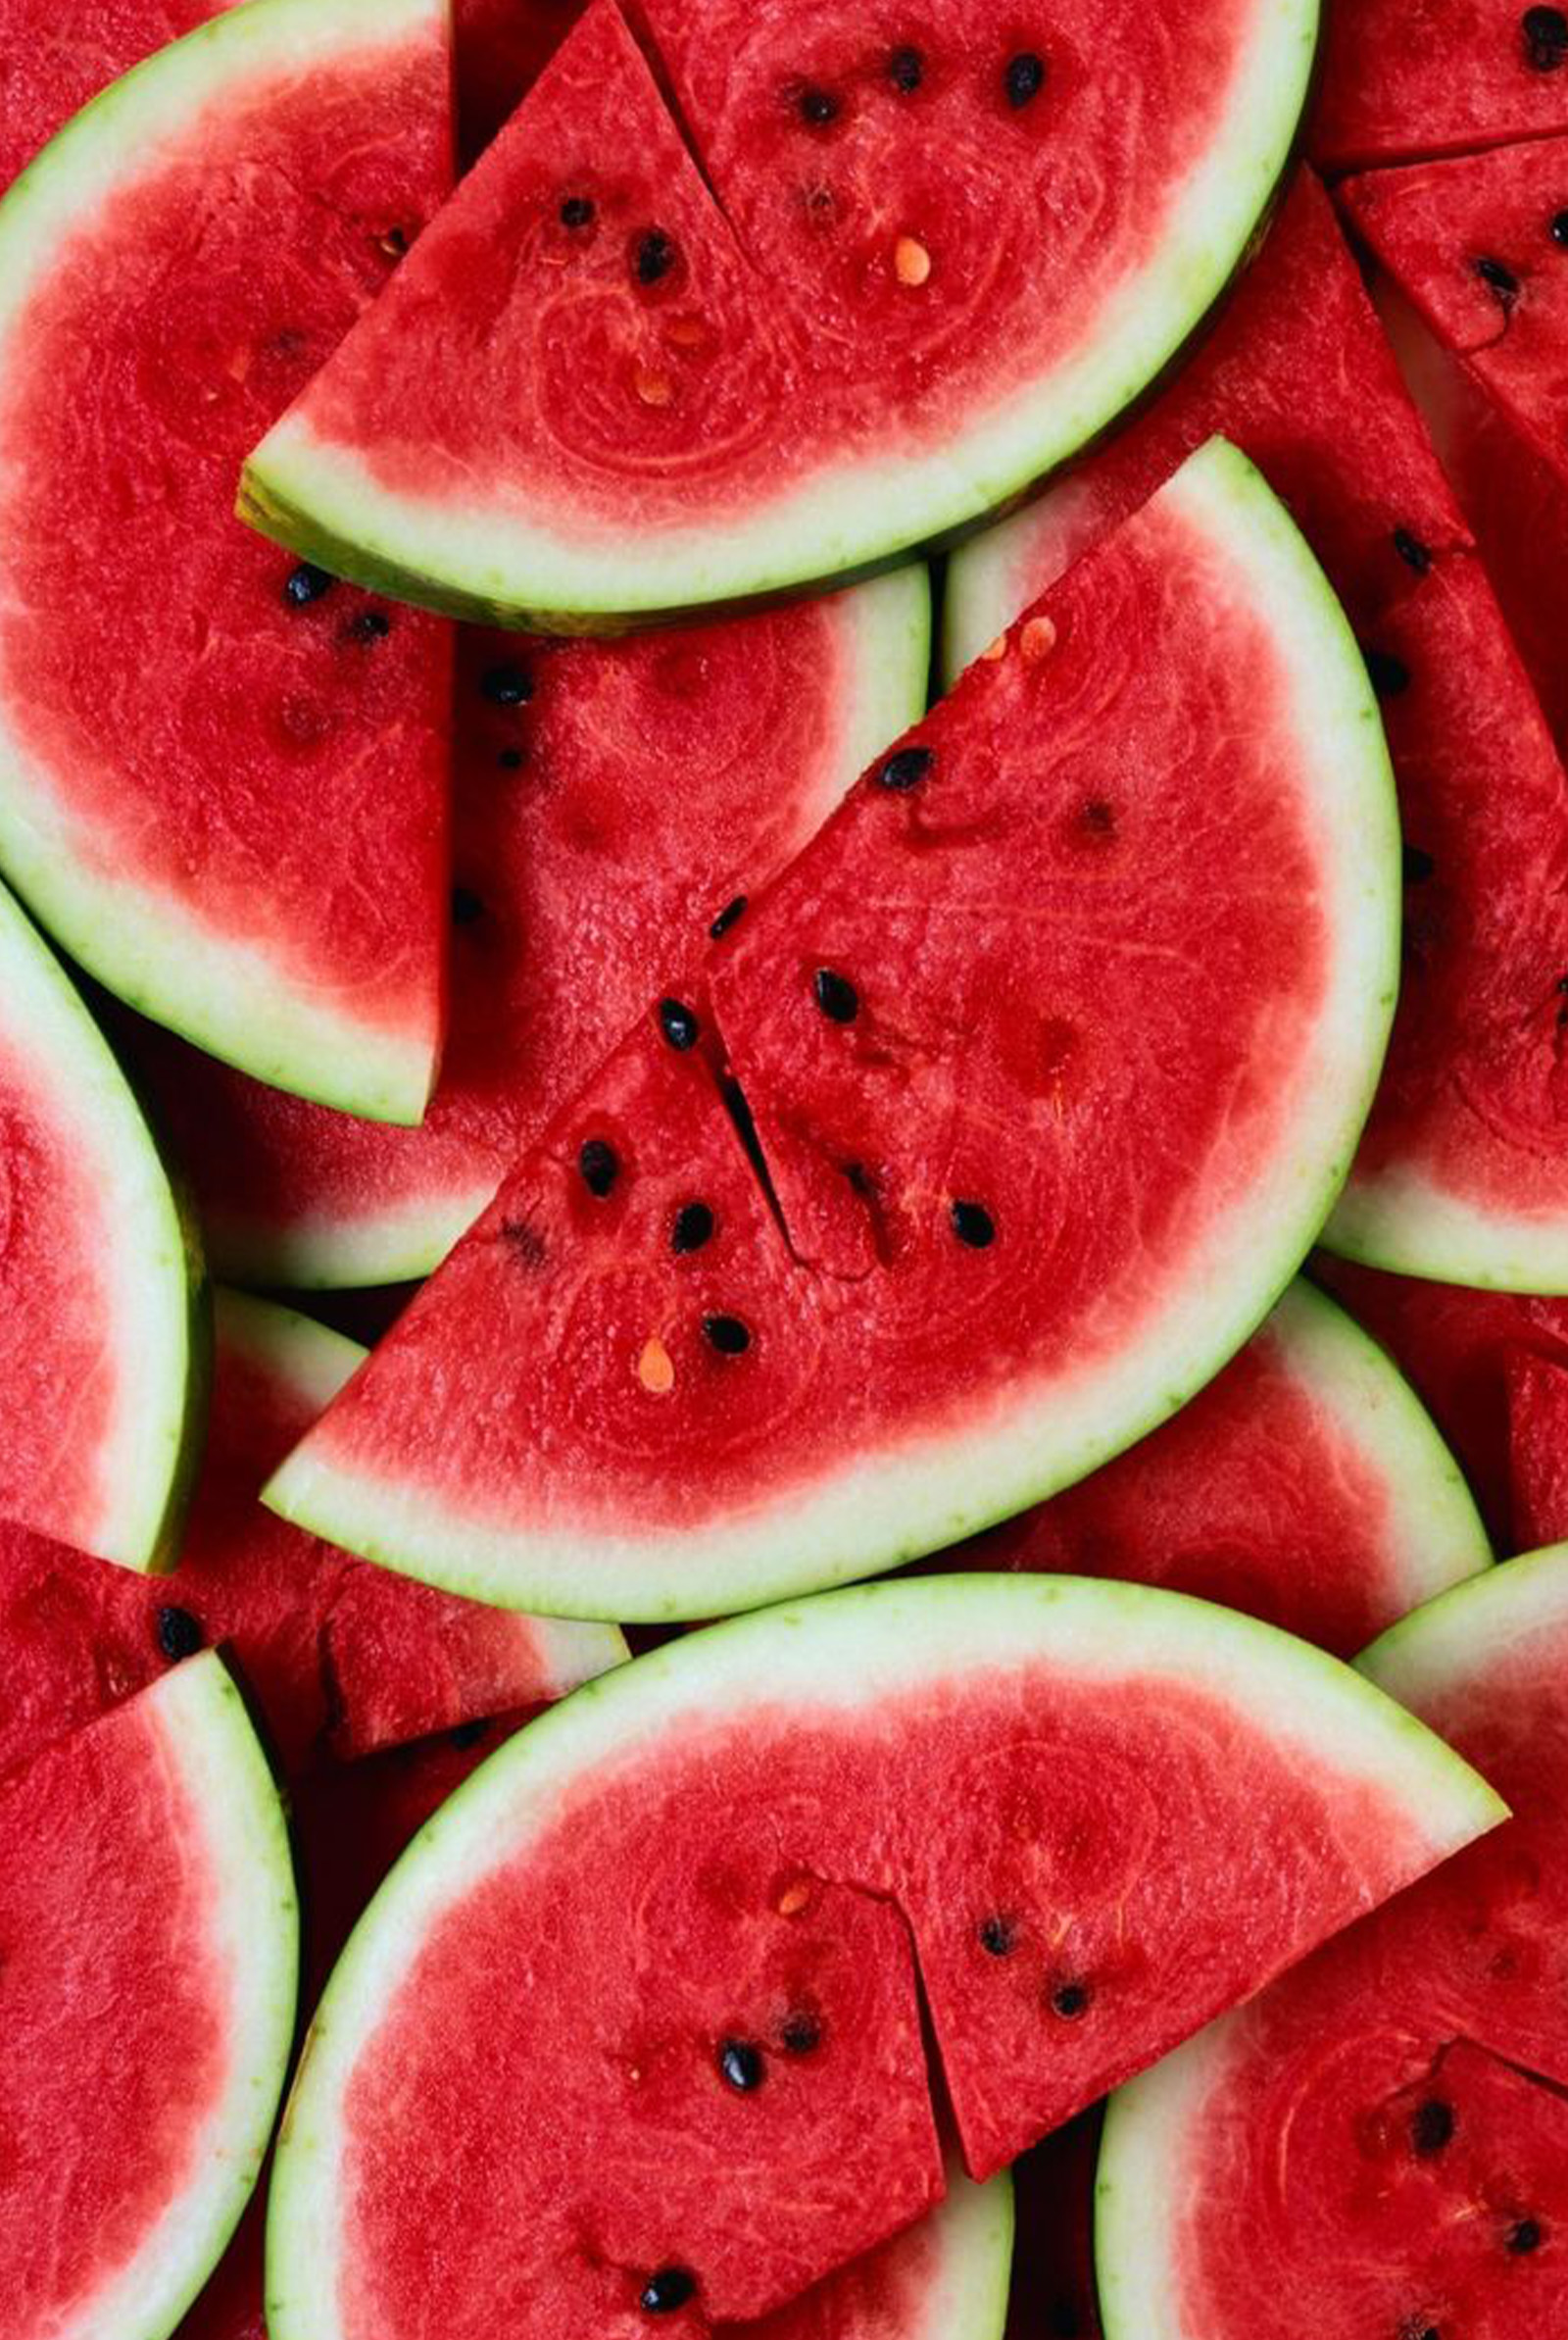 Watermelon good for the skin